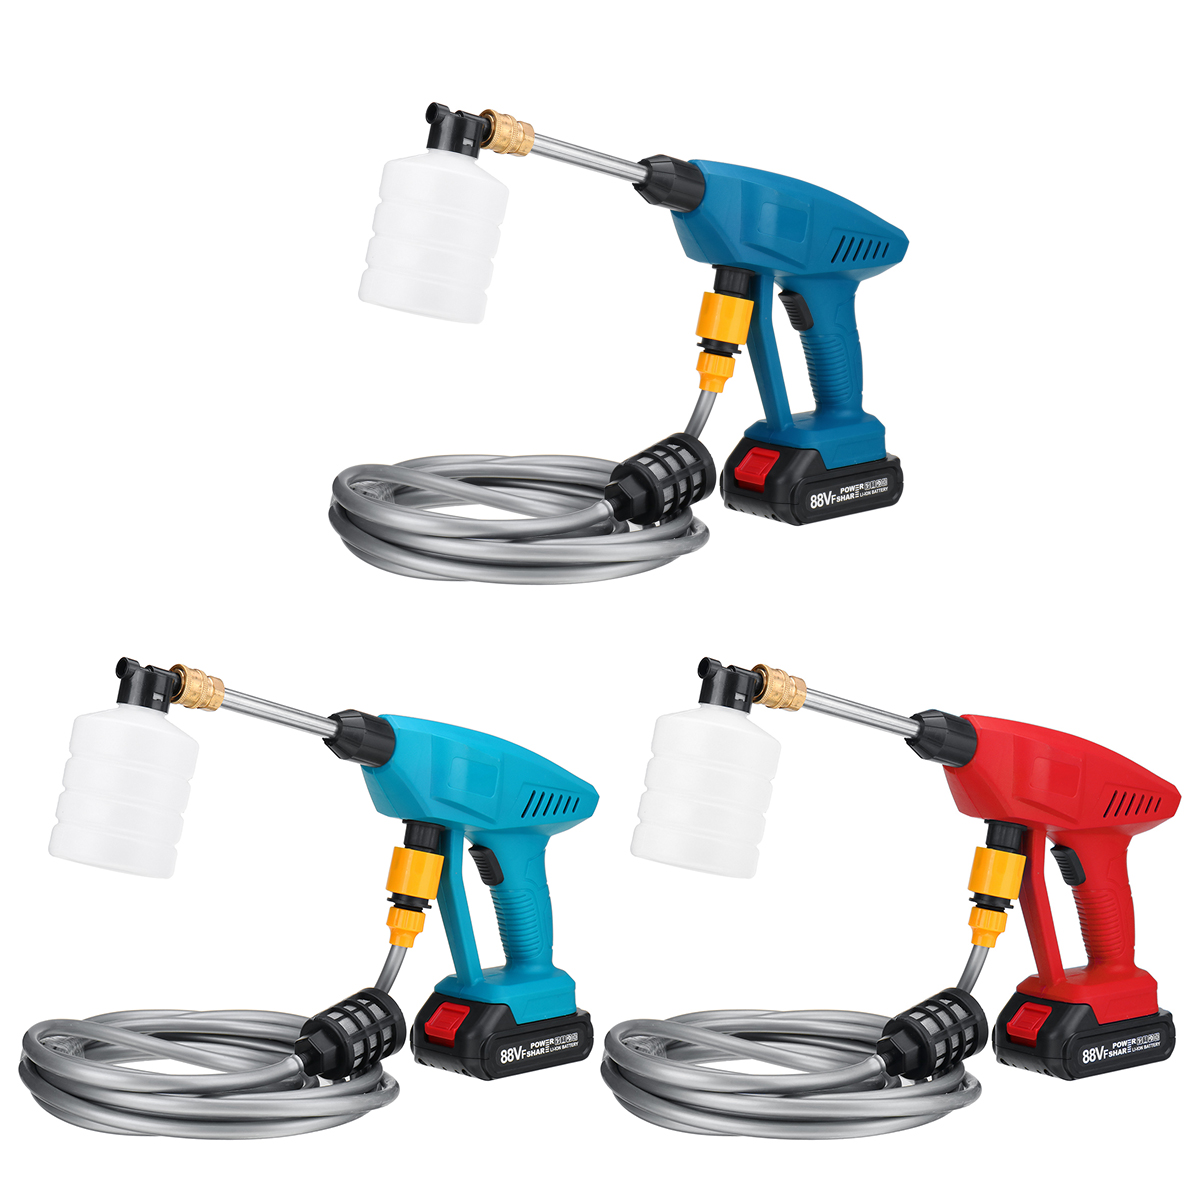 600W-Cordless-High-Pressure-Car-Power-Washer-Spray-Guns-Wand-Lance-Nozzle-Tips-Hose-Kit-W-Battery-Fo-1872419-7